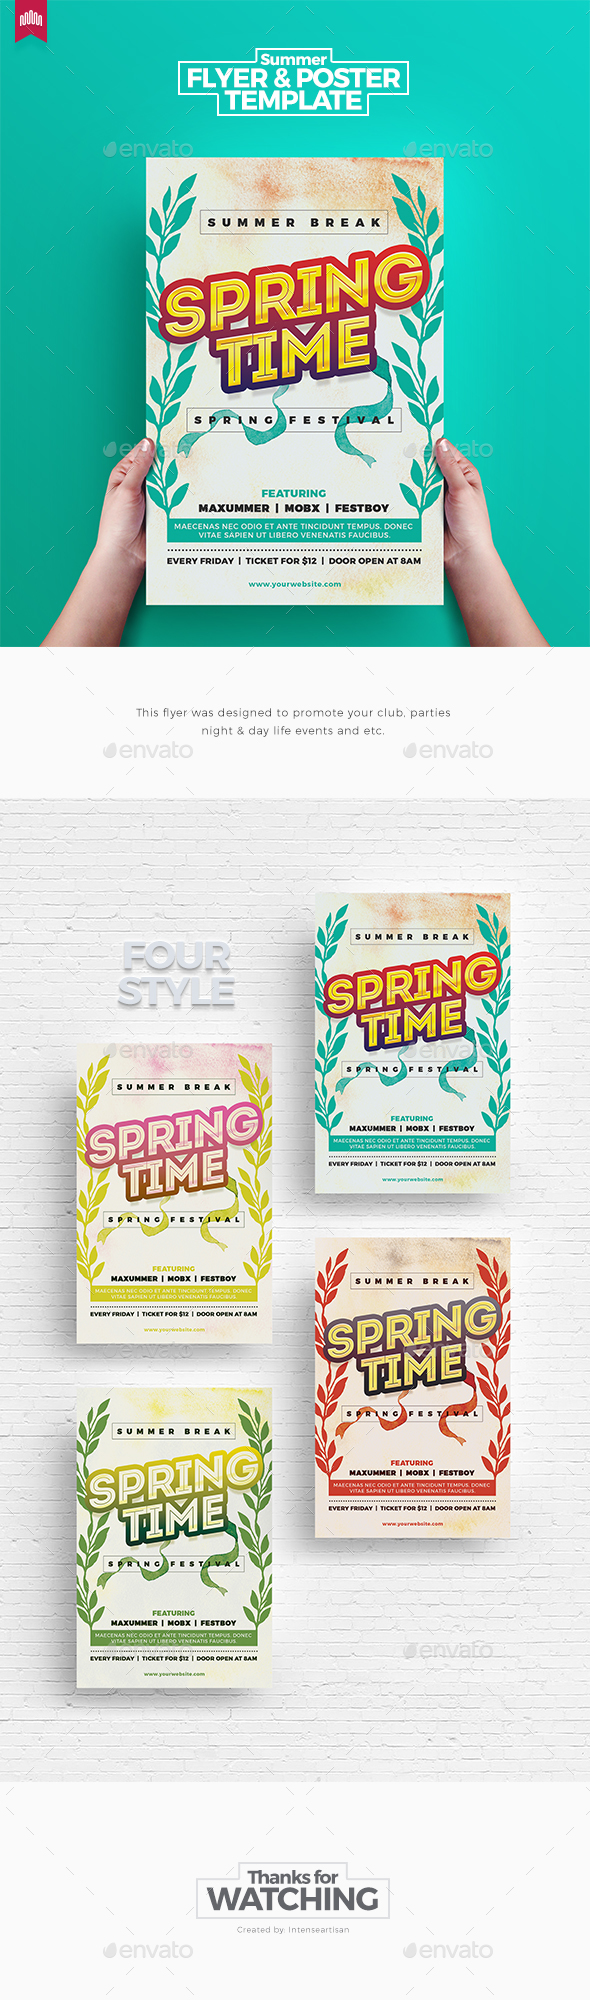 Spring Time - Flyer Template